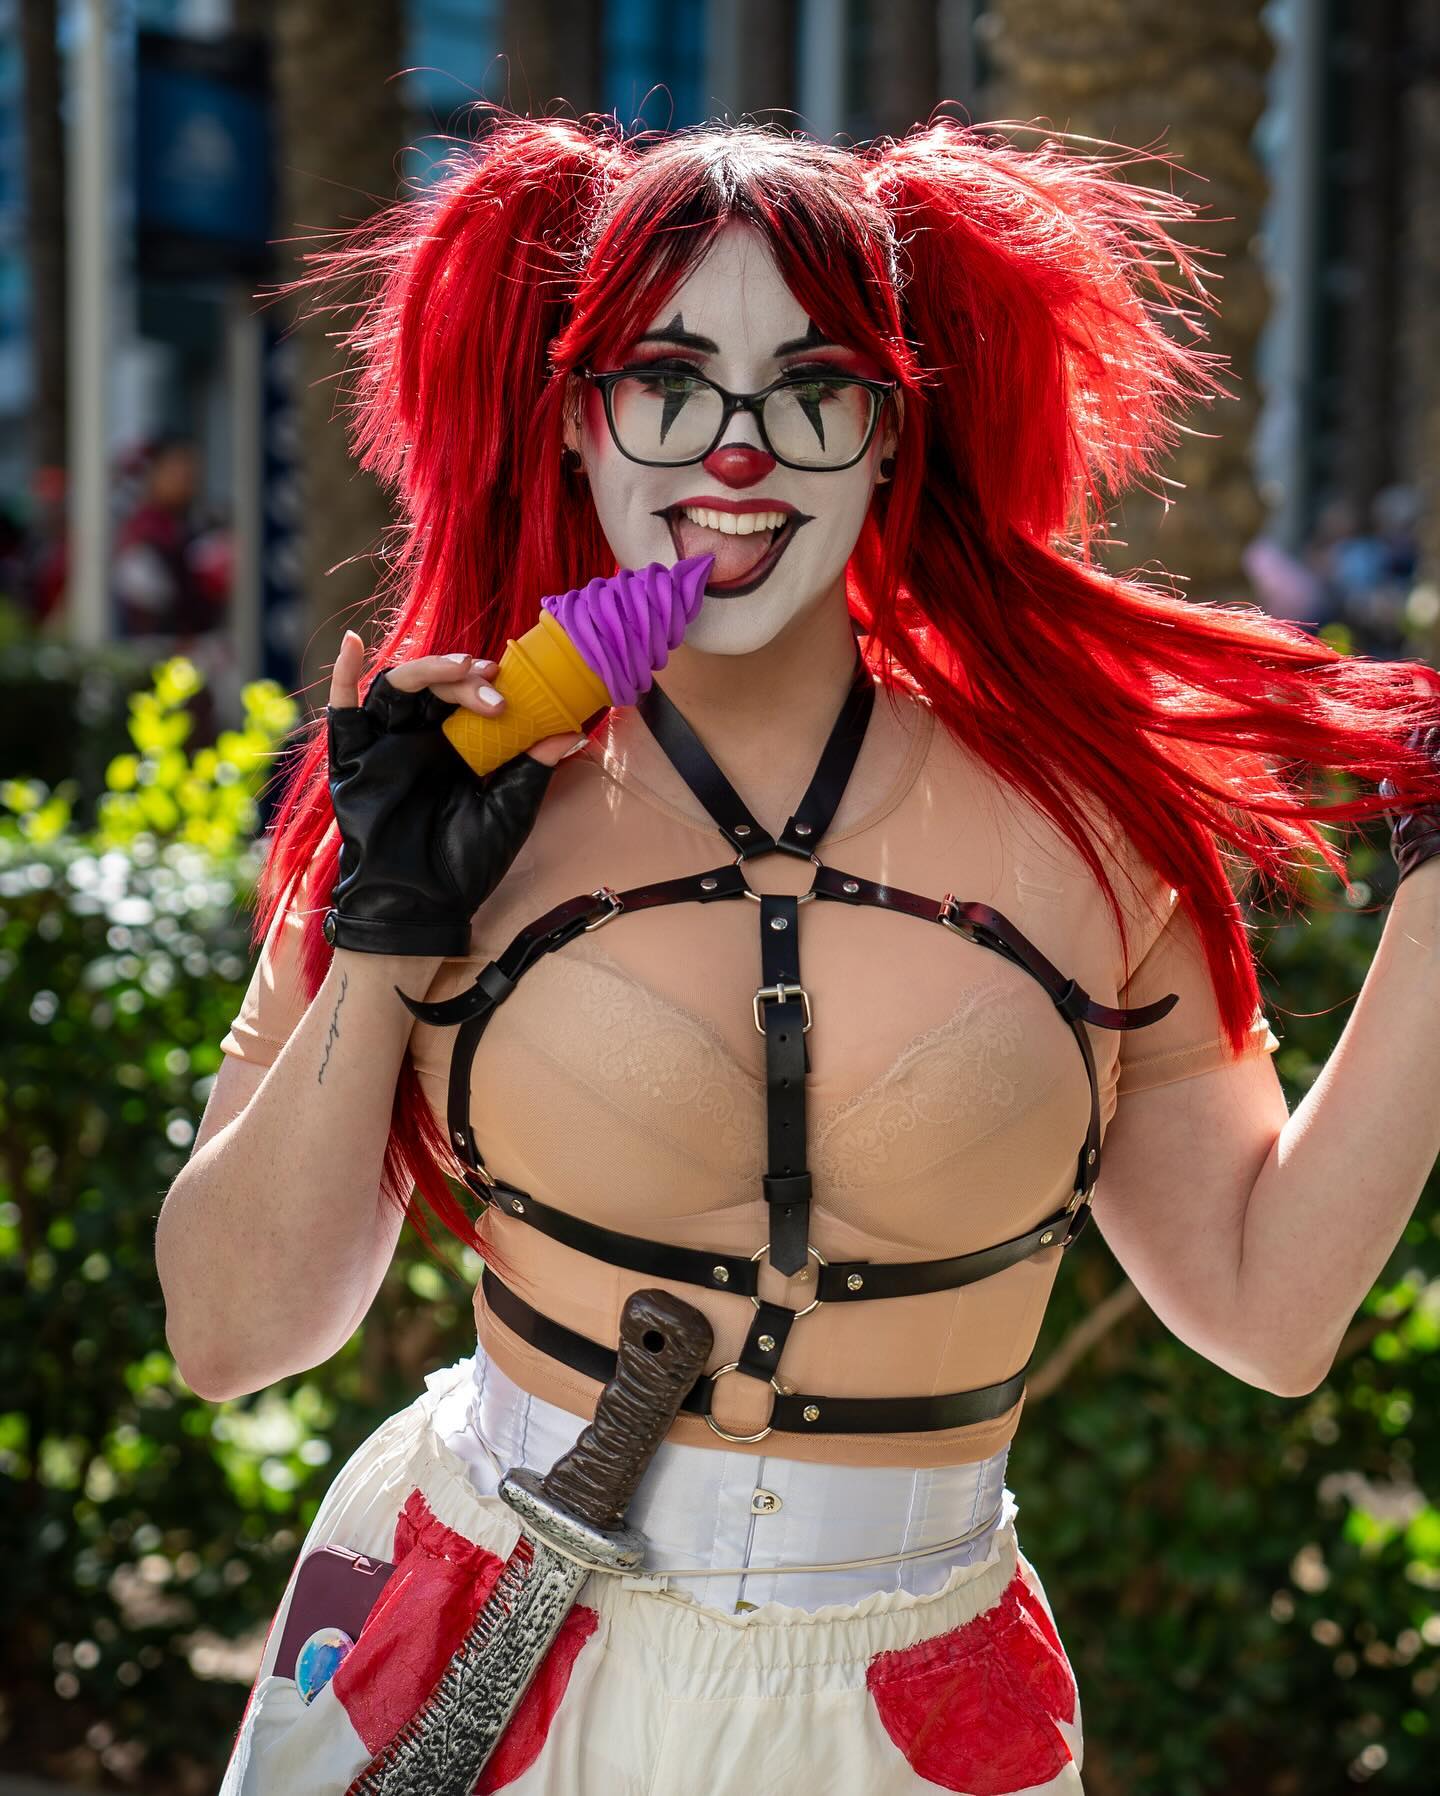 Just clownin around 🤡 Thank you for the pictures @dat_roshi_photo #twistedmetal #sweettooth #sweettoothcosplay